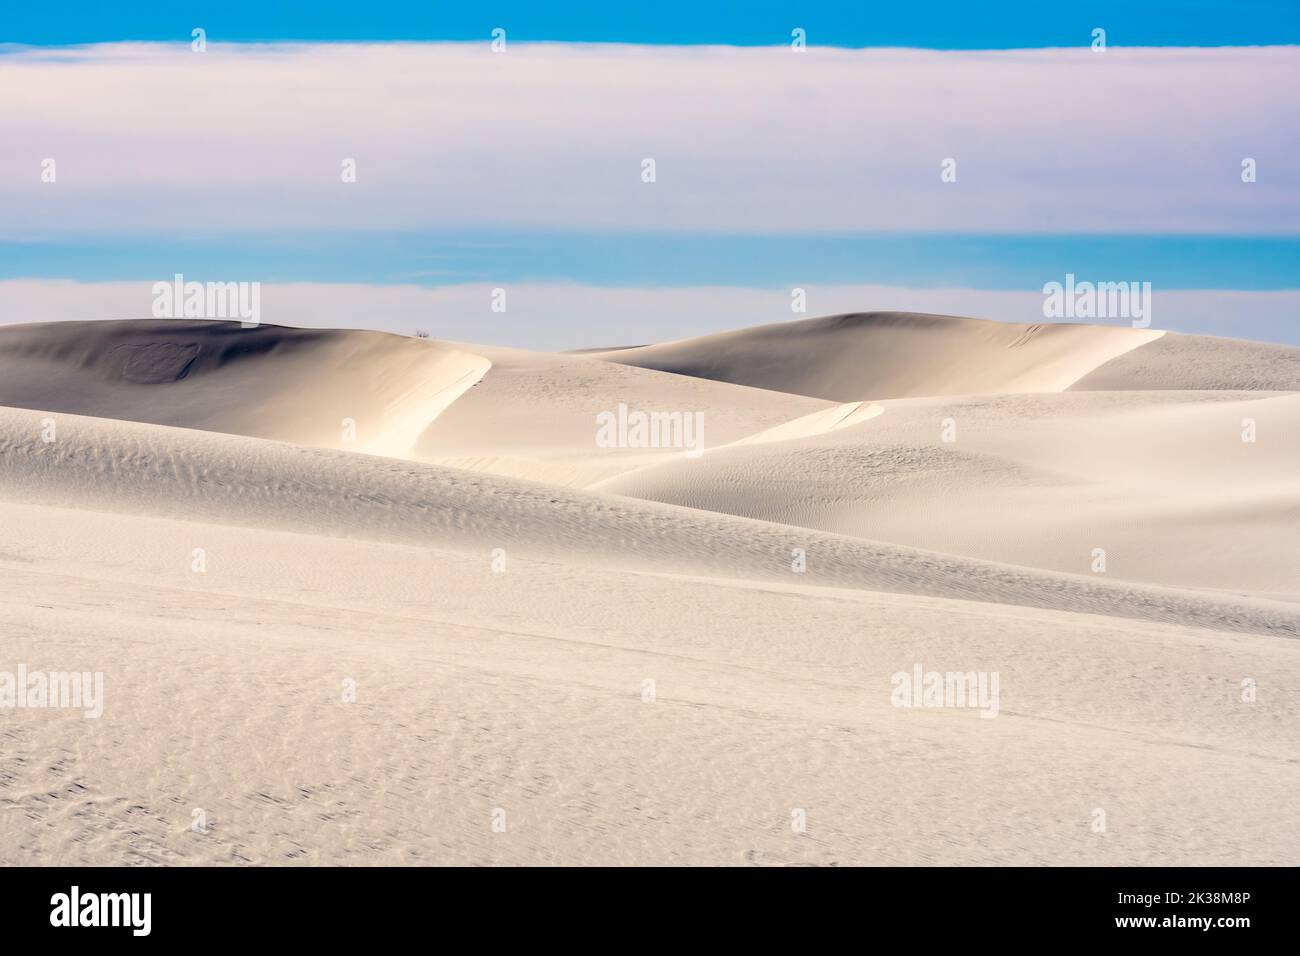 Smooth Untouched Dunes Under A Cloudy Sky in White Sands National Park Stock Photo